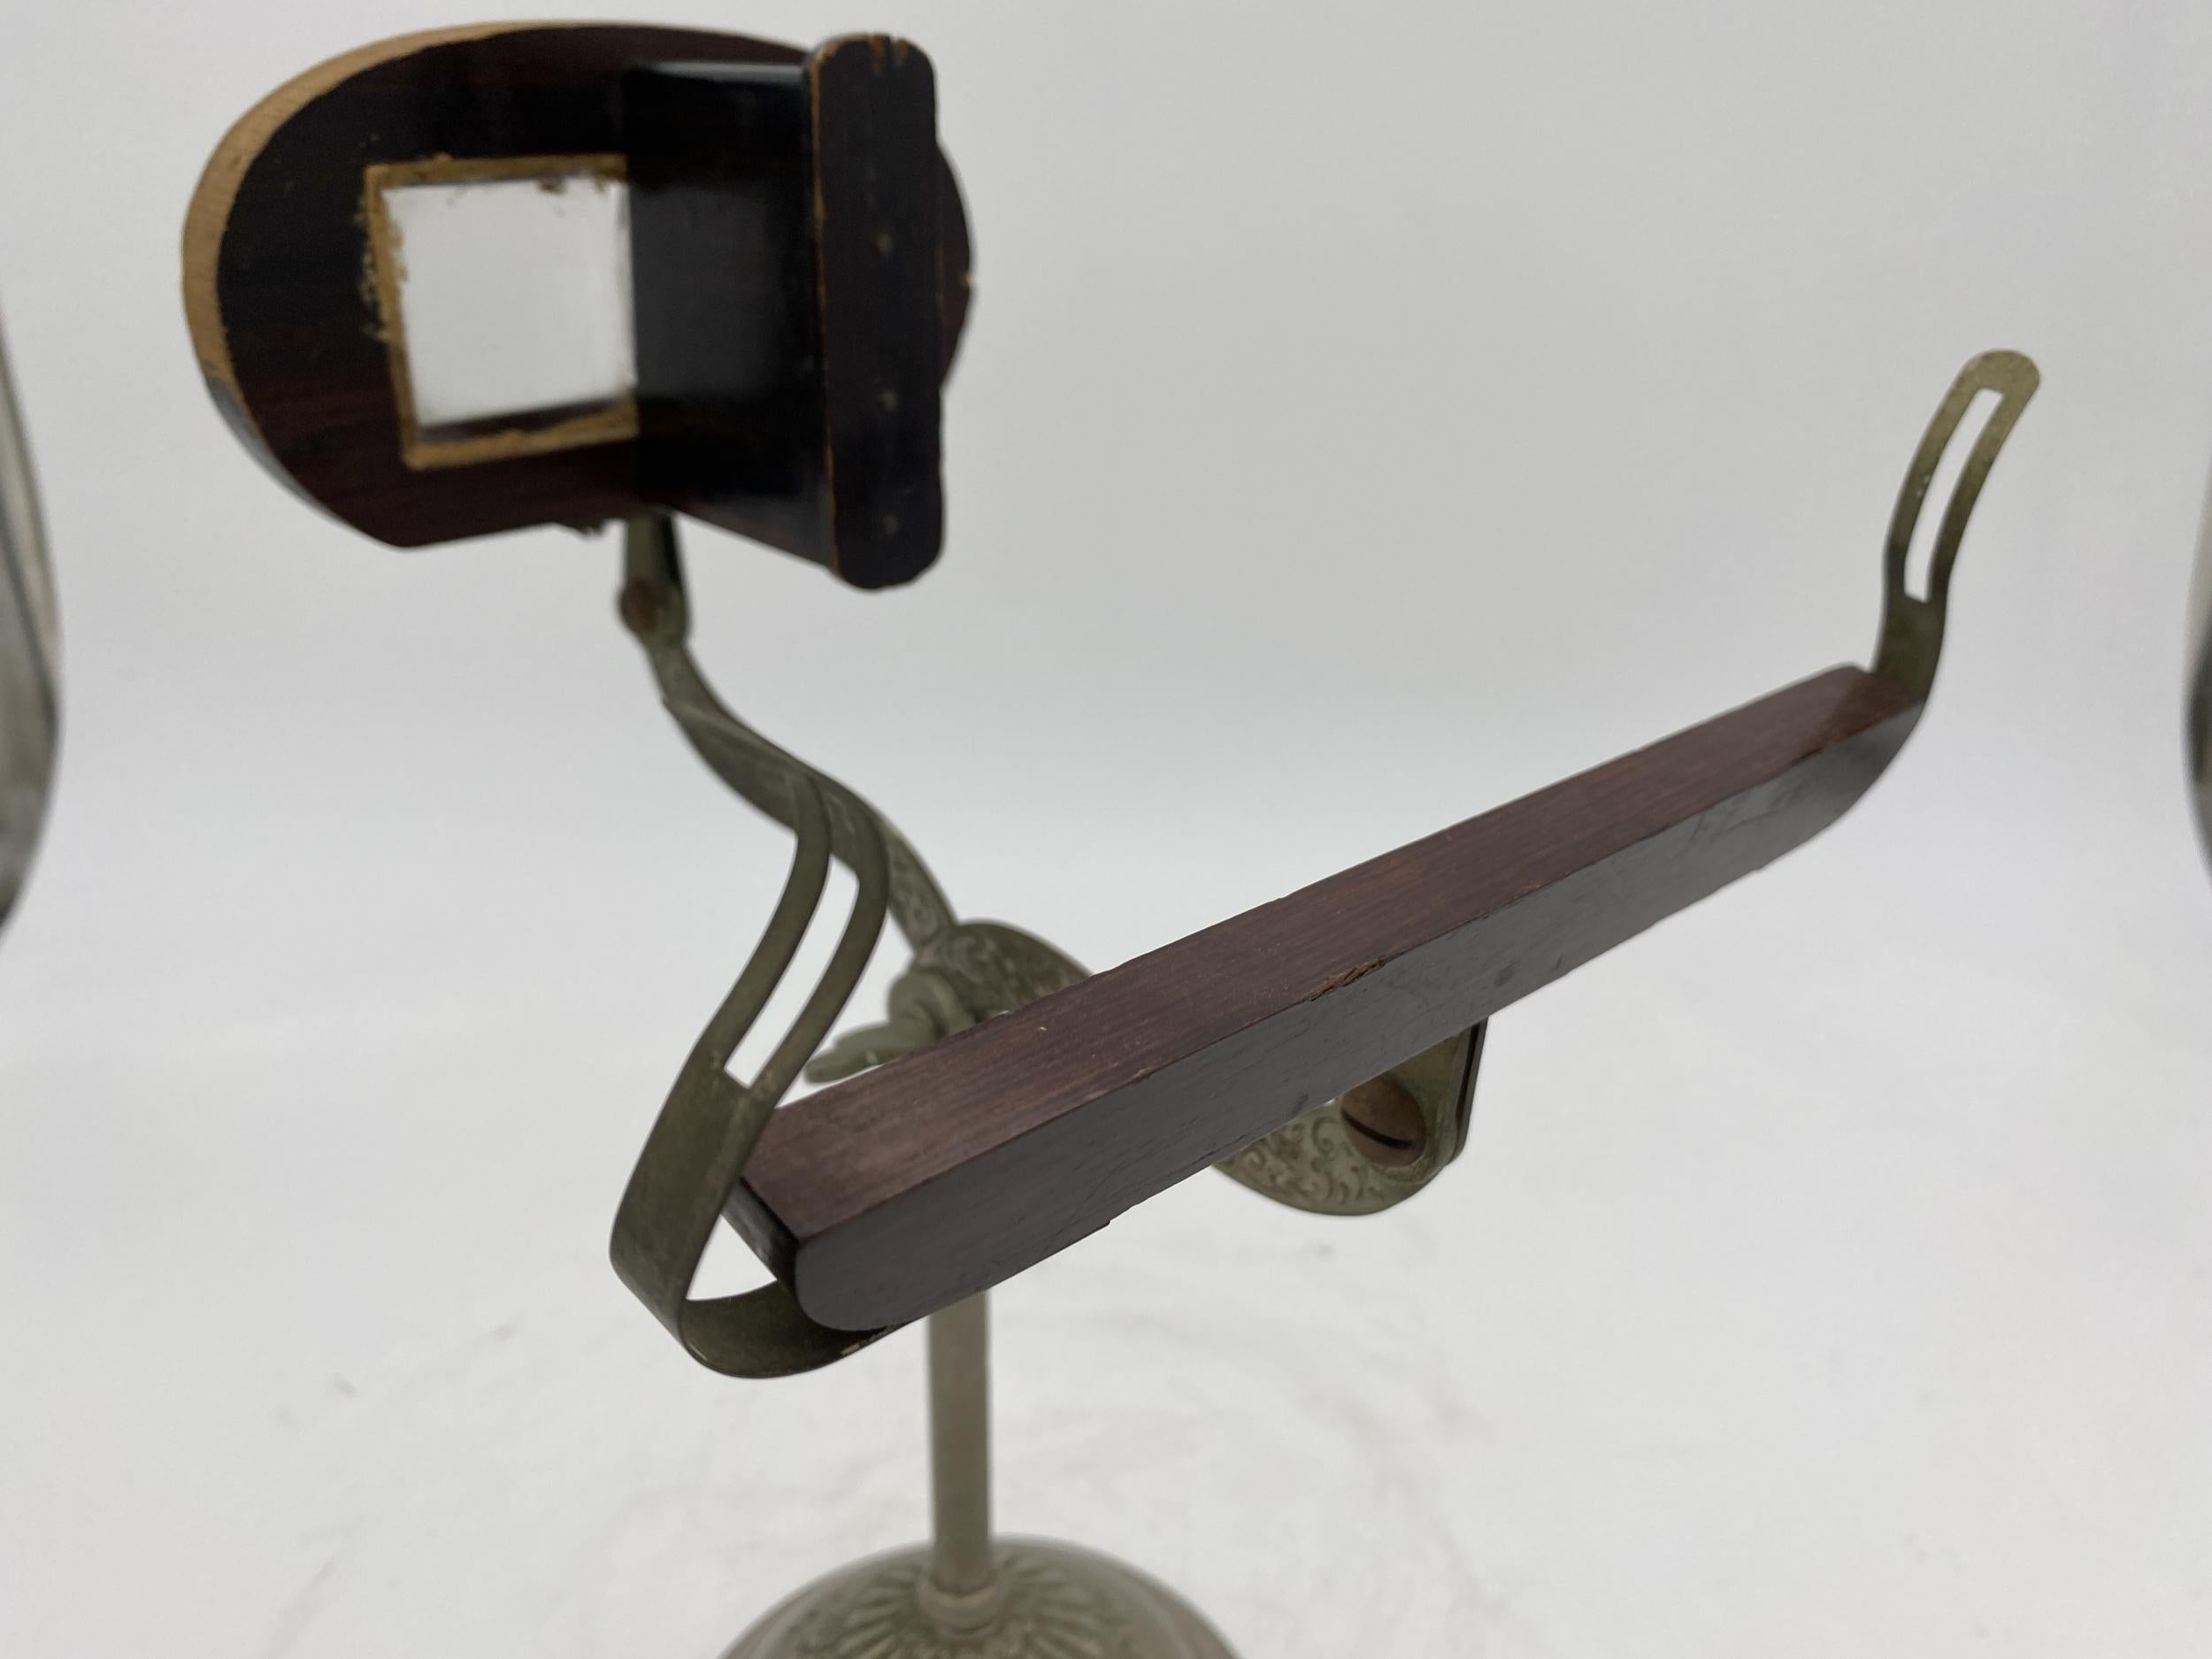 American Rare Decorative Table Top Stereo-Graphoscope Stereo Viewer, circa 1889 For Sale